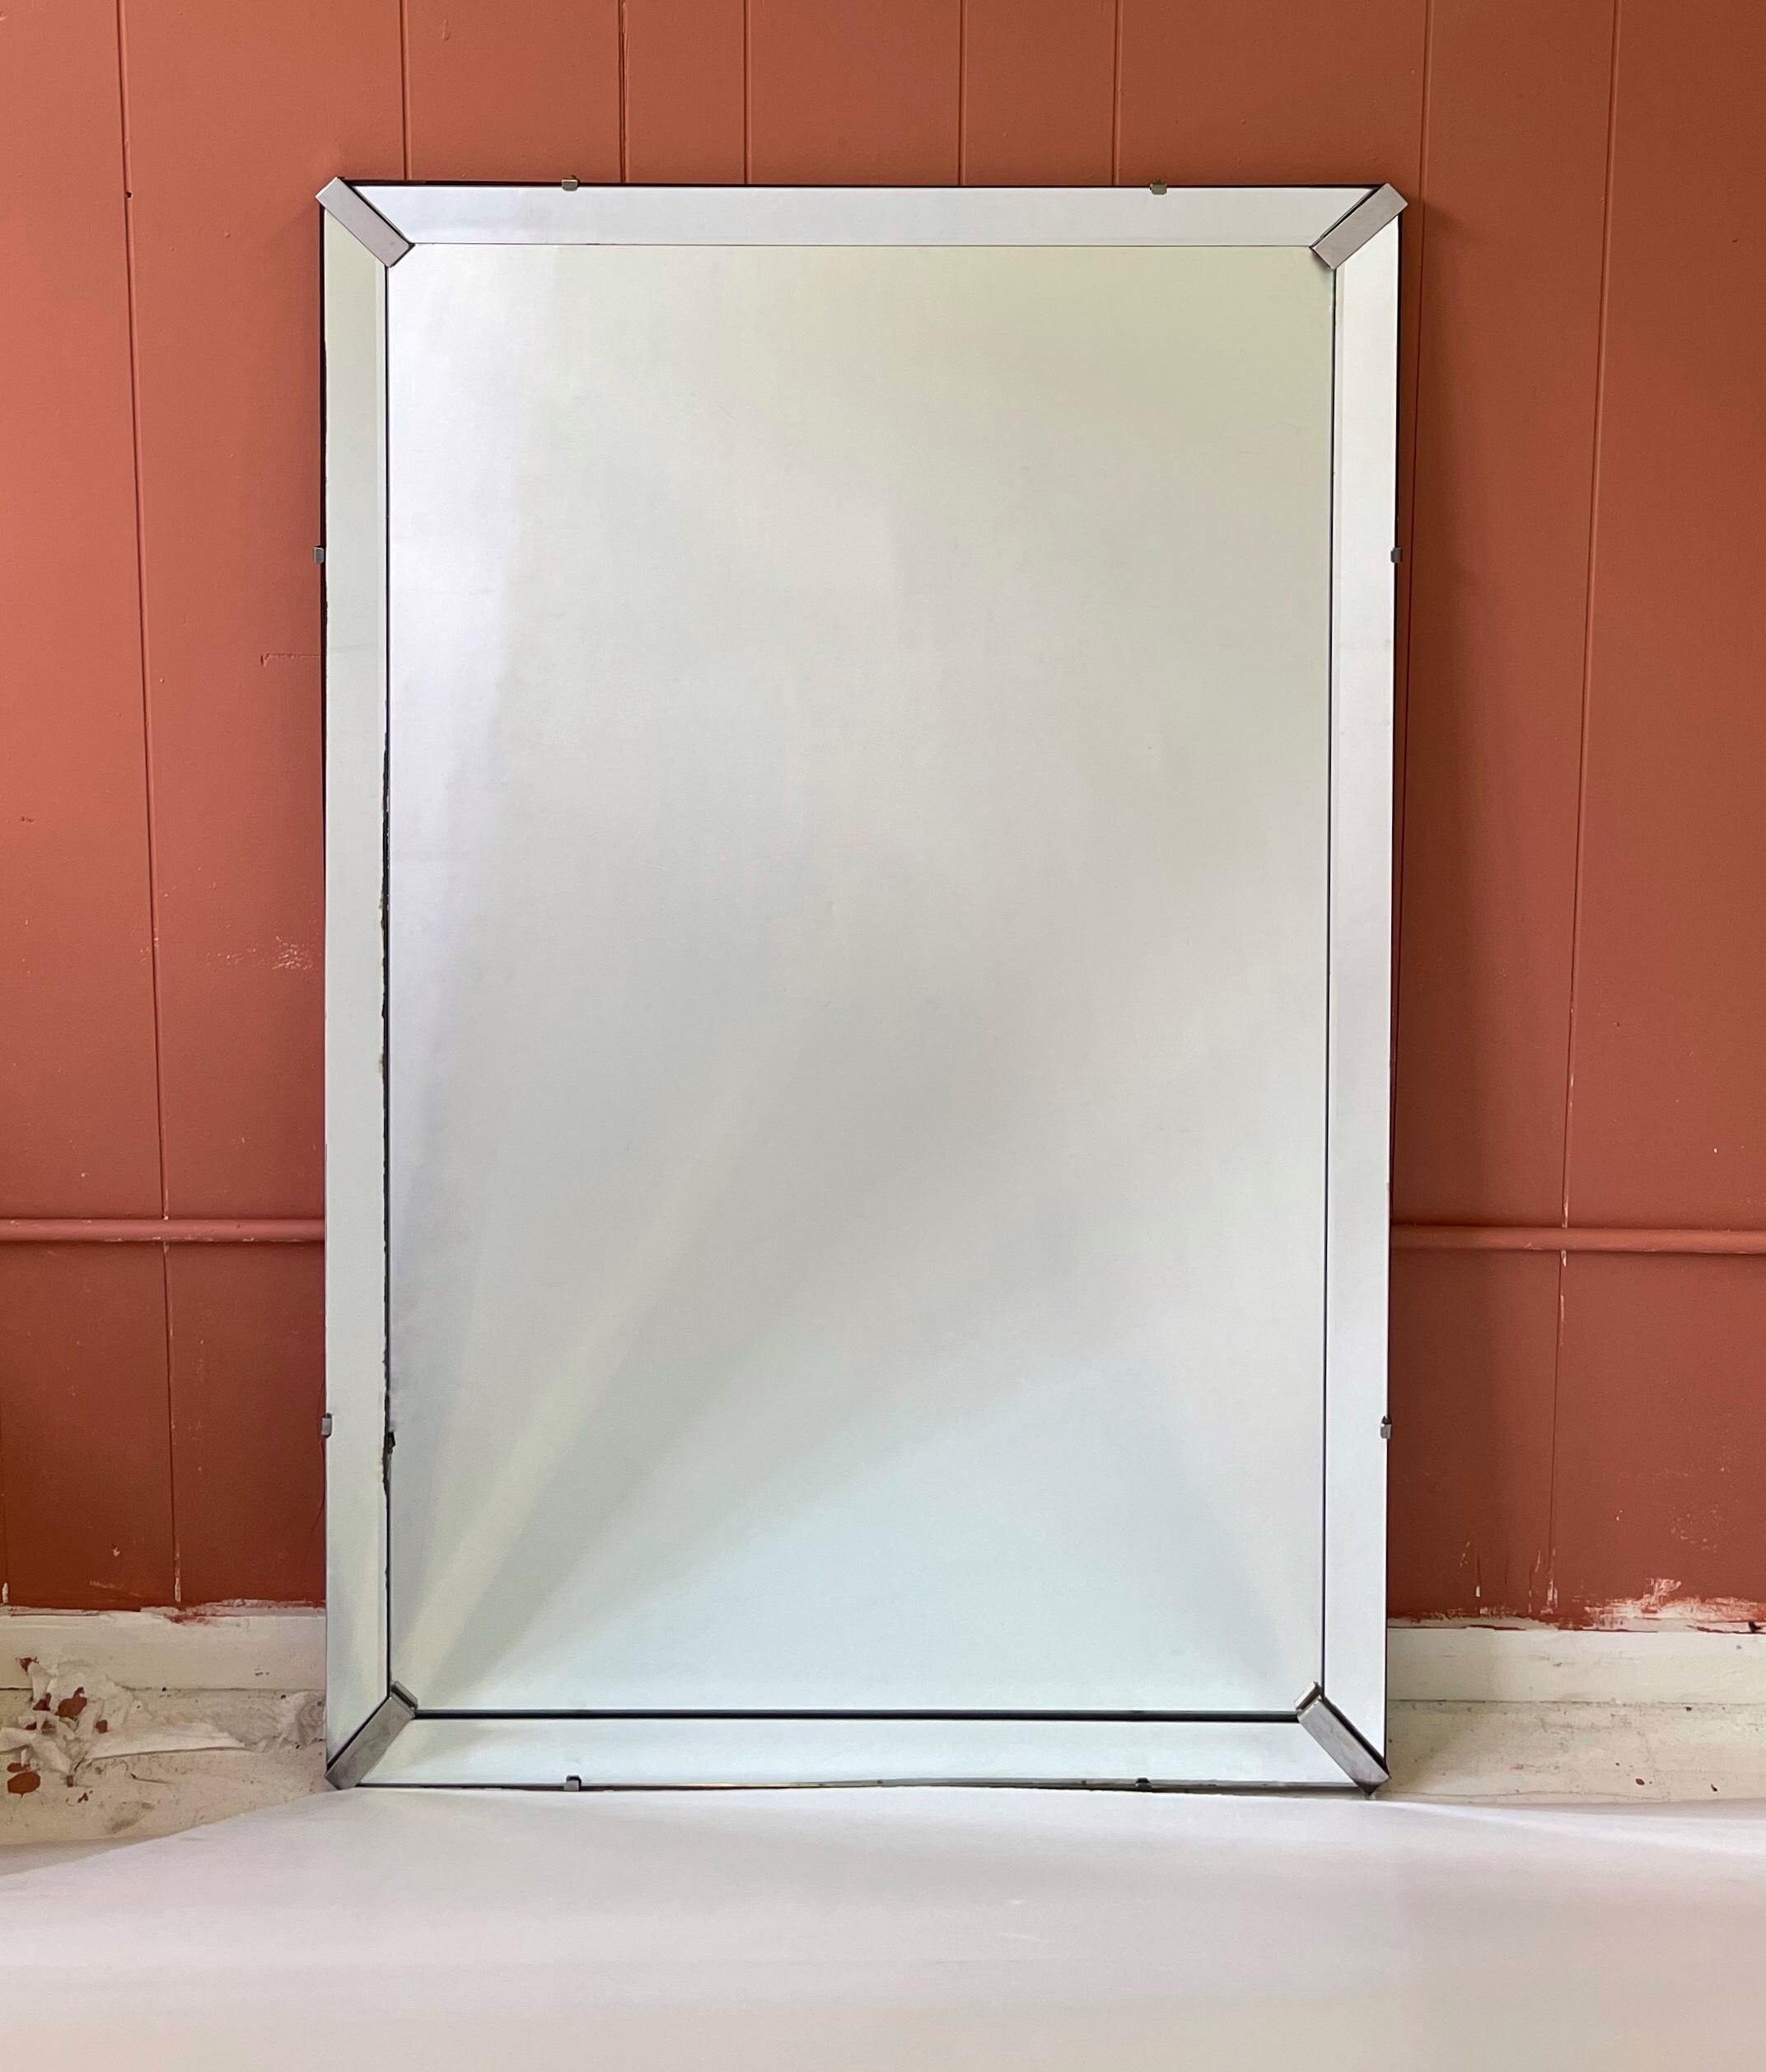 Large scale streamlined 1940's Art Deco wall mirror held in a beveled mirror frame with nickel fittings.